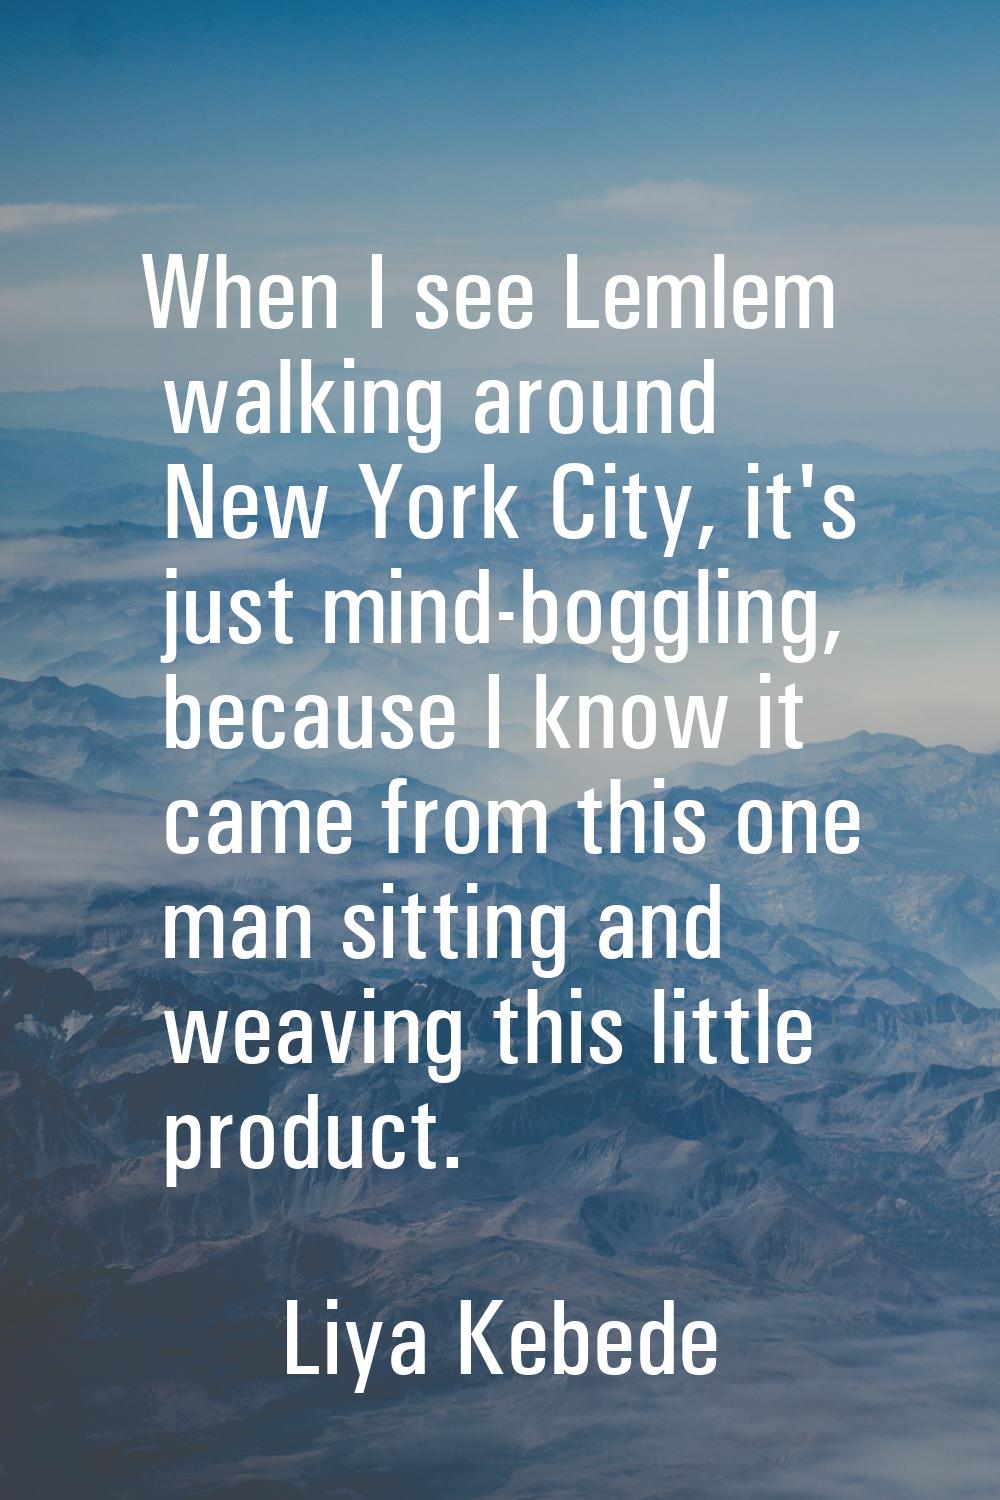 When I see Lemlem walking around New York City, it's just mind-boggling, because I know it came fro